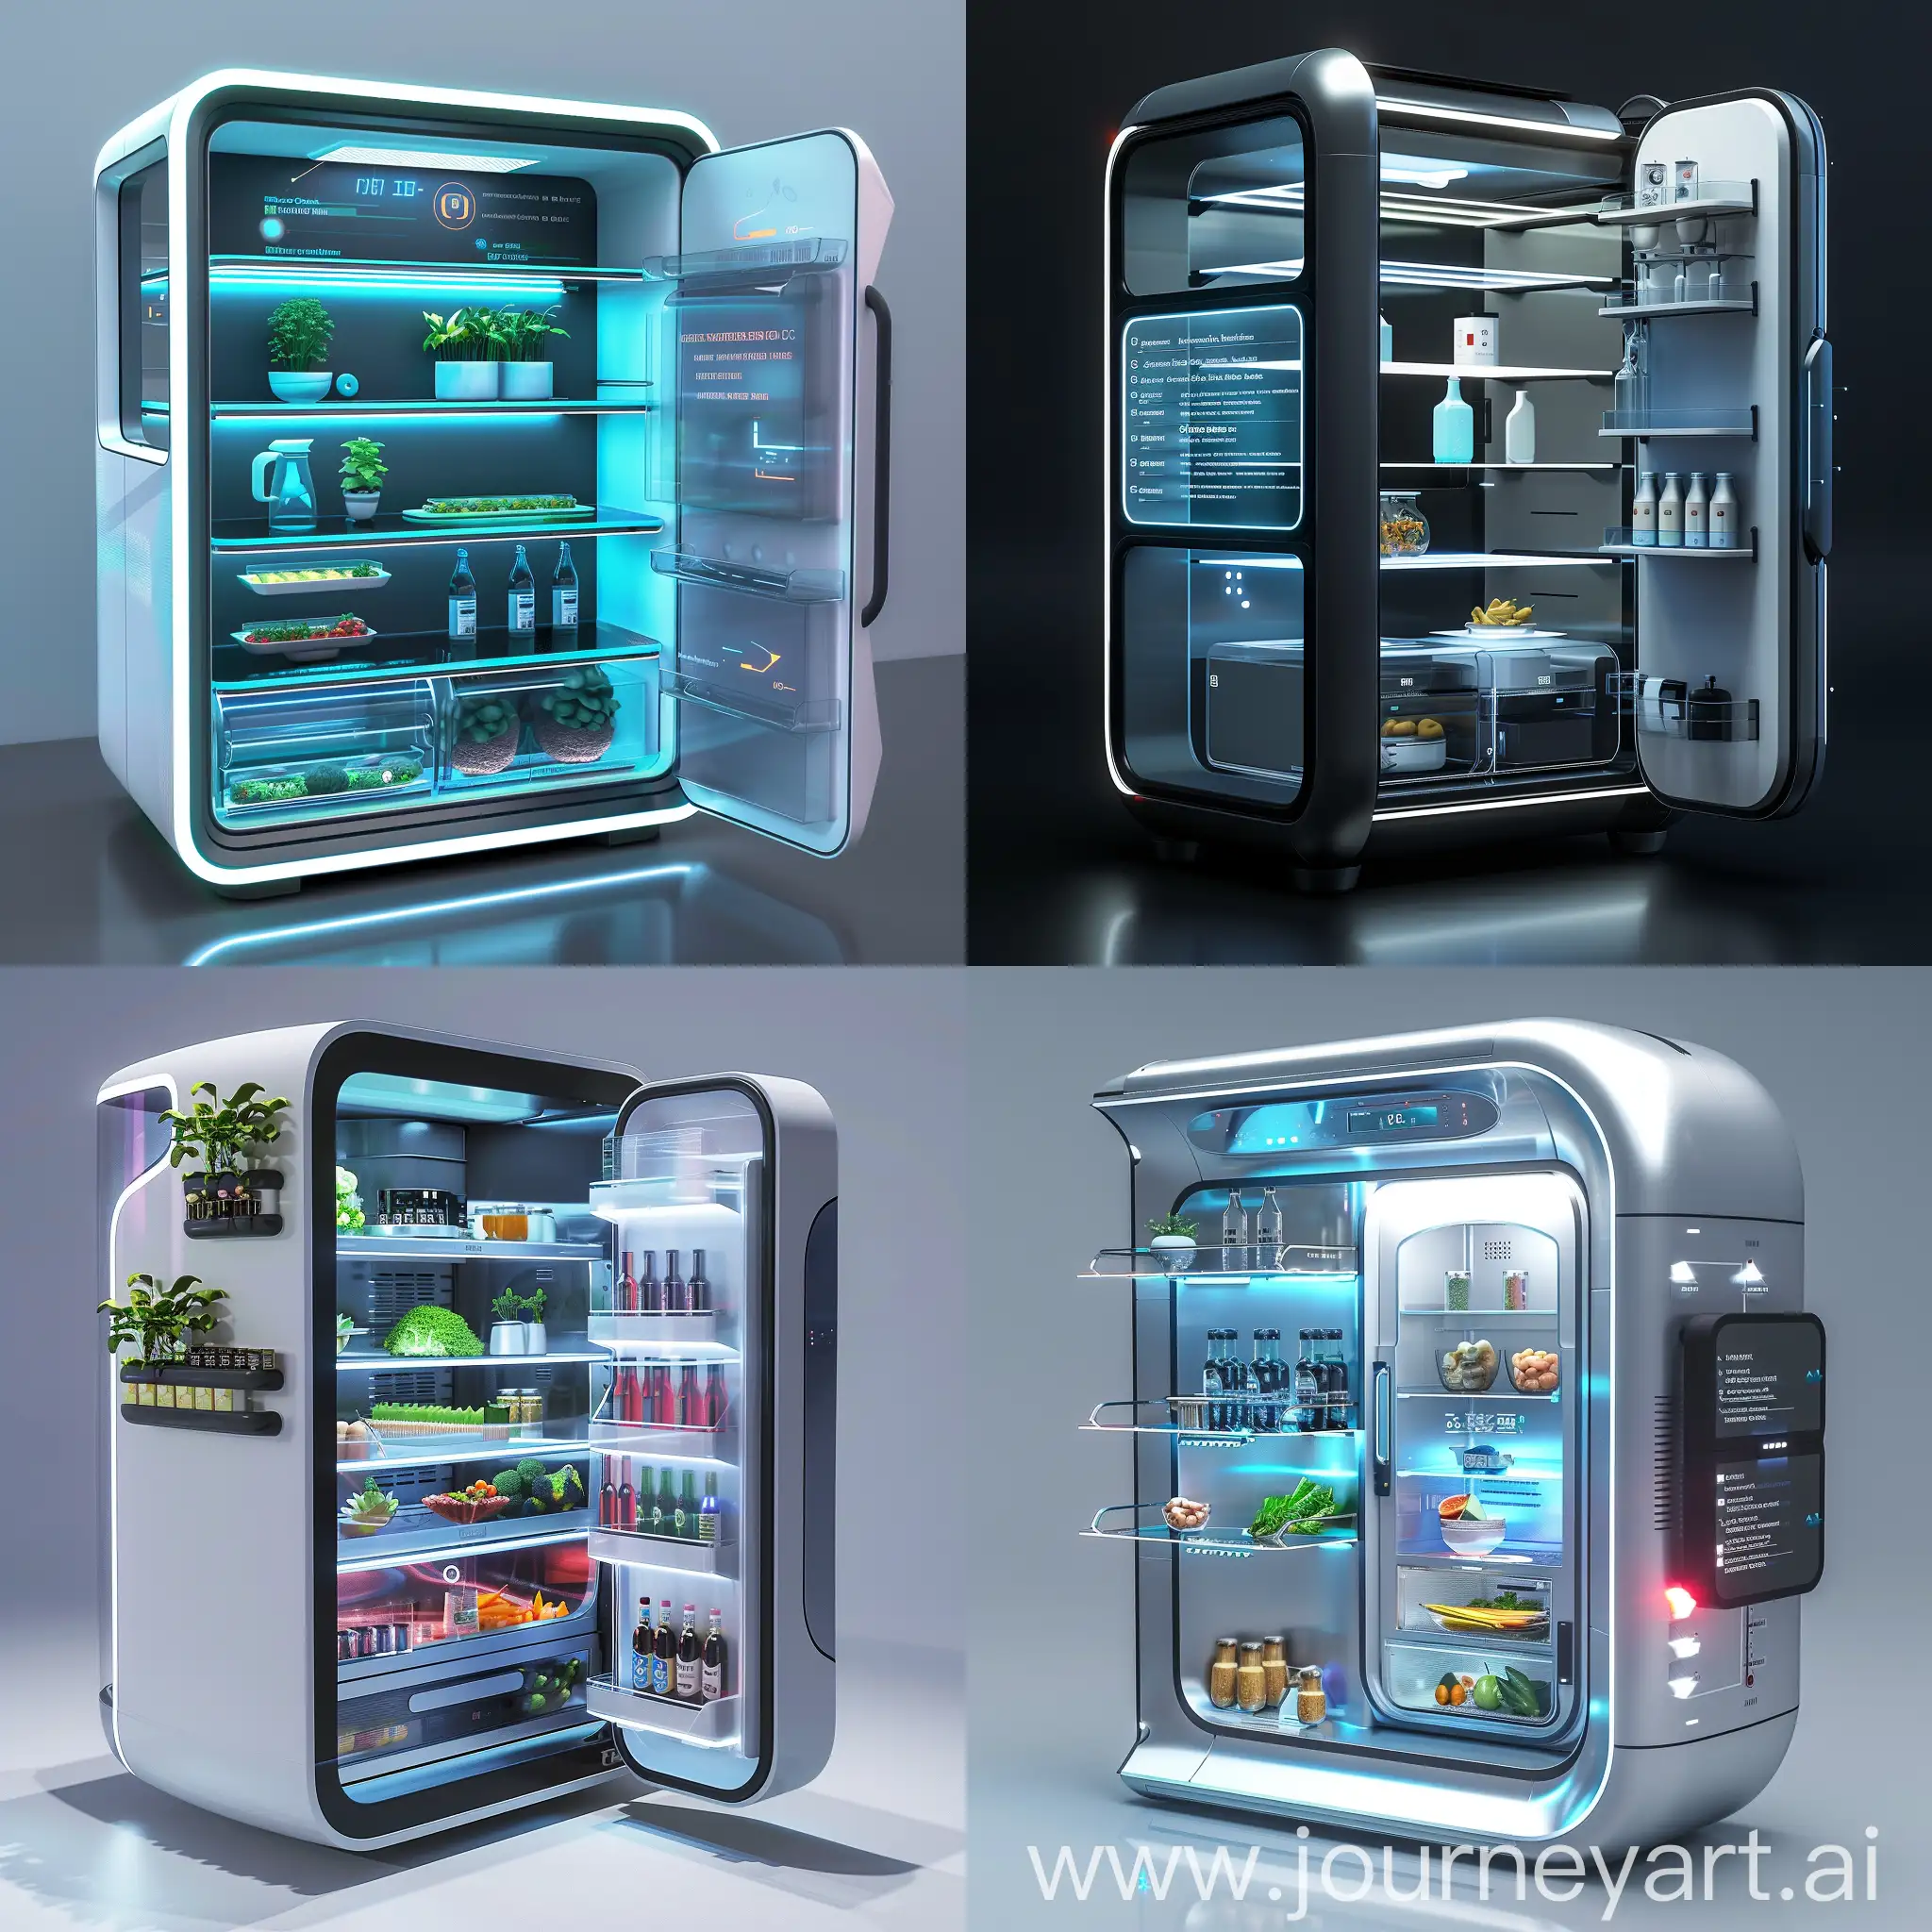 Futuristic fridge, in futuristic style, Smart Shelves with Weight Sensors, Adjustable Temperature Zones, Transparent OLED Displays, Self-Cleaning Surfaces, Automated Inventory Management, Voice and Gesture Control, Energy-Efficient Cooling Technology, Nutritional and Health Monitoring, Automated Restocking, Built-in Water and Air Purification Systems, Interactive Touchscreen Door, Smart Glass Technology, Integrated AI Personal Assistant, Proximity Sensors and Automatic Door Opening, Wi-Fi and Bluetooth Connectivity, Customizable Exterior Panels, Built-in Cameras, Energy-Efficient LED Lighting, UV-C Sterilization Technology, Wireless Charging Stations, Carbon Fiber Shelving, Polycarbonate Liners, Aluminum Alloy Cooling Coils, Plastic Interior Components, Foam Composite Insulation, Titanium Hinges and Hardware, Magnesium Alloy Door Frames, Polymer Door Seals, Composite Compressor Housing, Hollow-Core Shelving, Aluminum Alloy Exterior Panels, Polycarbonate Door Handles, Thin Profile LED Display, Slimline Glass Doors, Integrated Plastic Trim, Carbon Fiber Reinforced Plastic Kick Plate, Fiberglass Reinforced Plastic Back Panel, Retractable Handles, Hollow-Core Exterior Walls, Minimalist Design, unreal engine 5